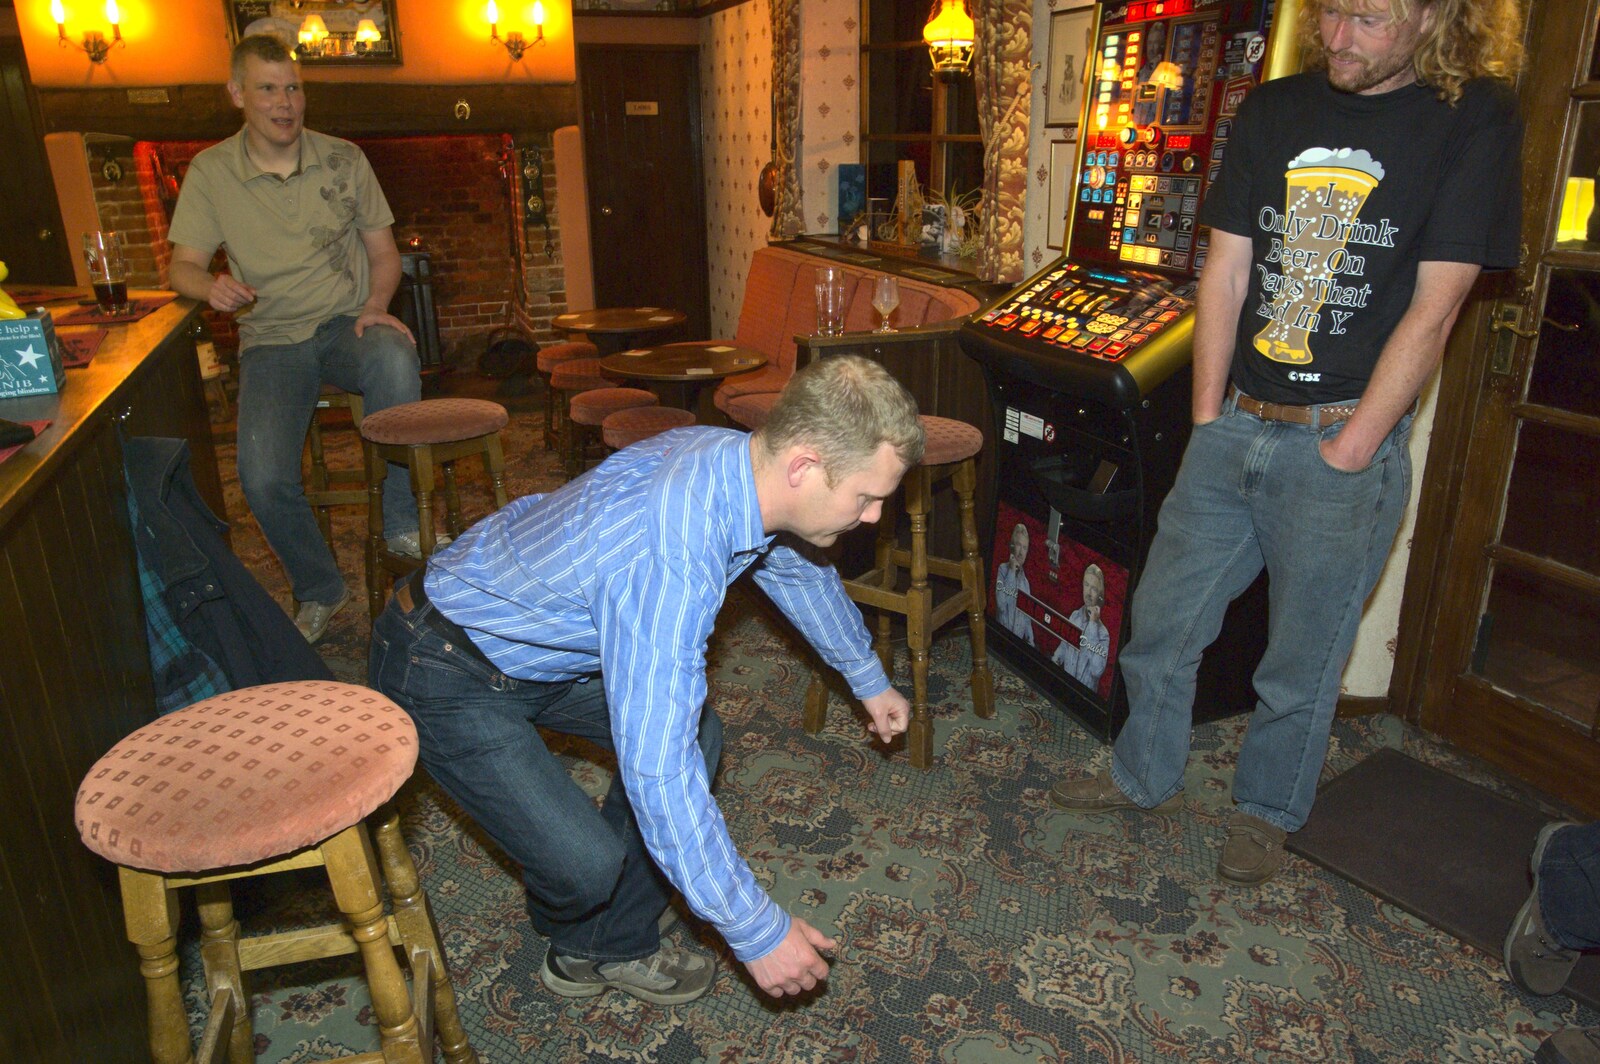 Pre-Wedding Beers at The Swan, Brome, Suffolk - 19th June 2010: Mikey does weird things on the floor